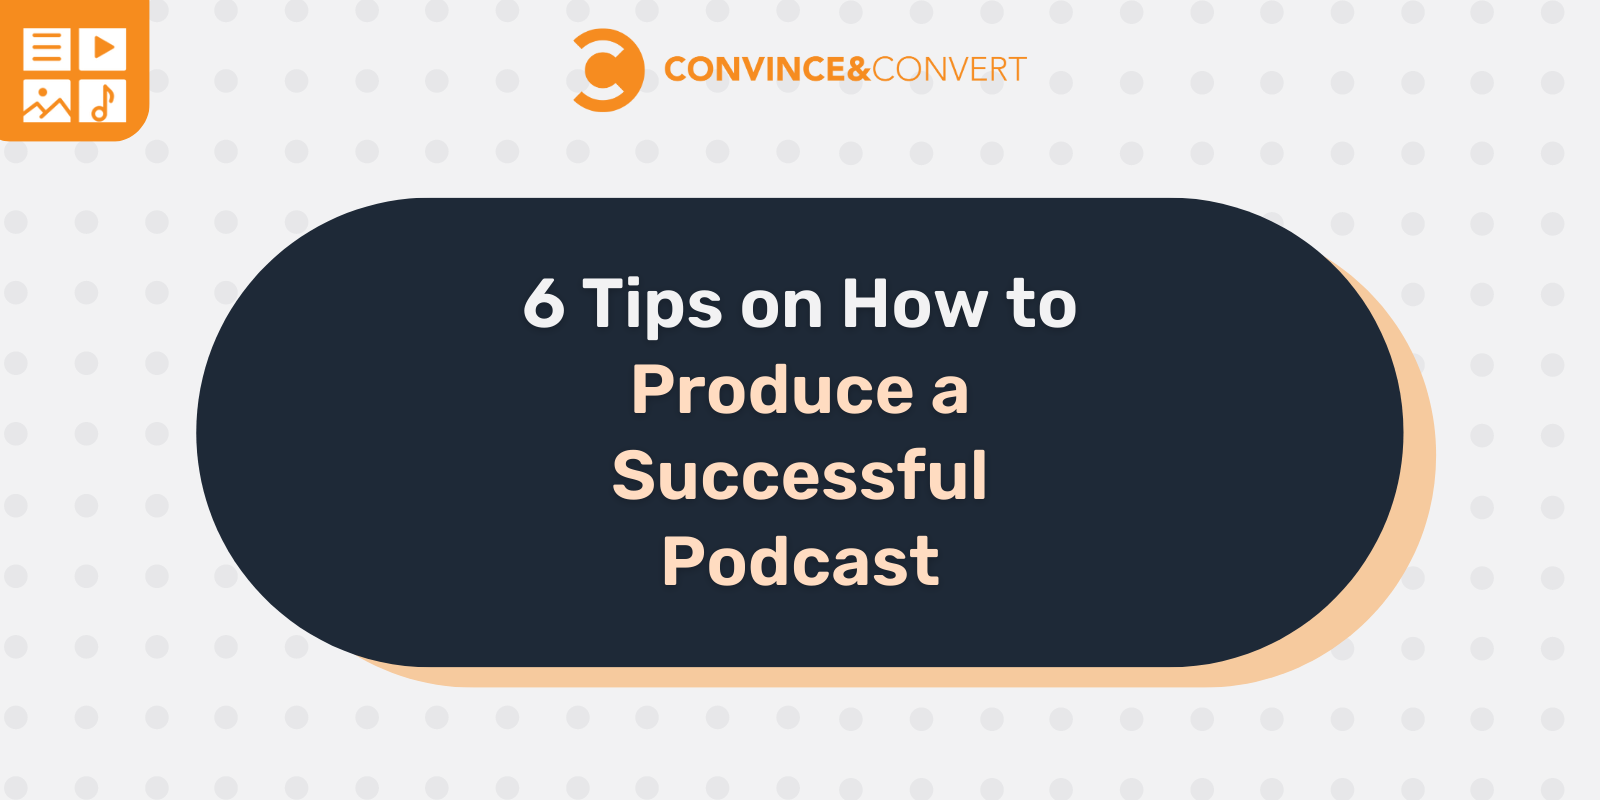 You are currently viewing 6 Tips on How to Produce a Successful Podcast